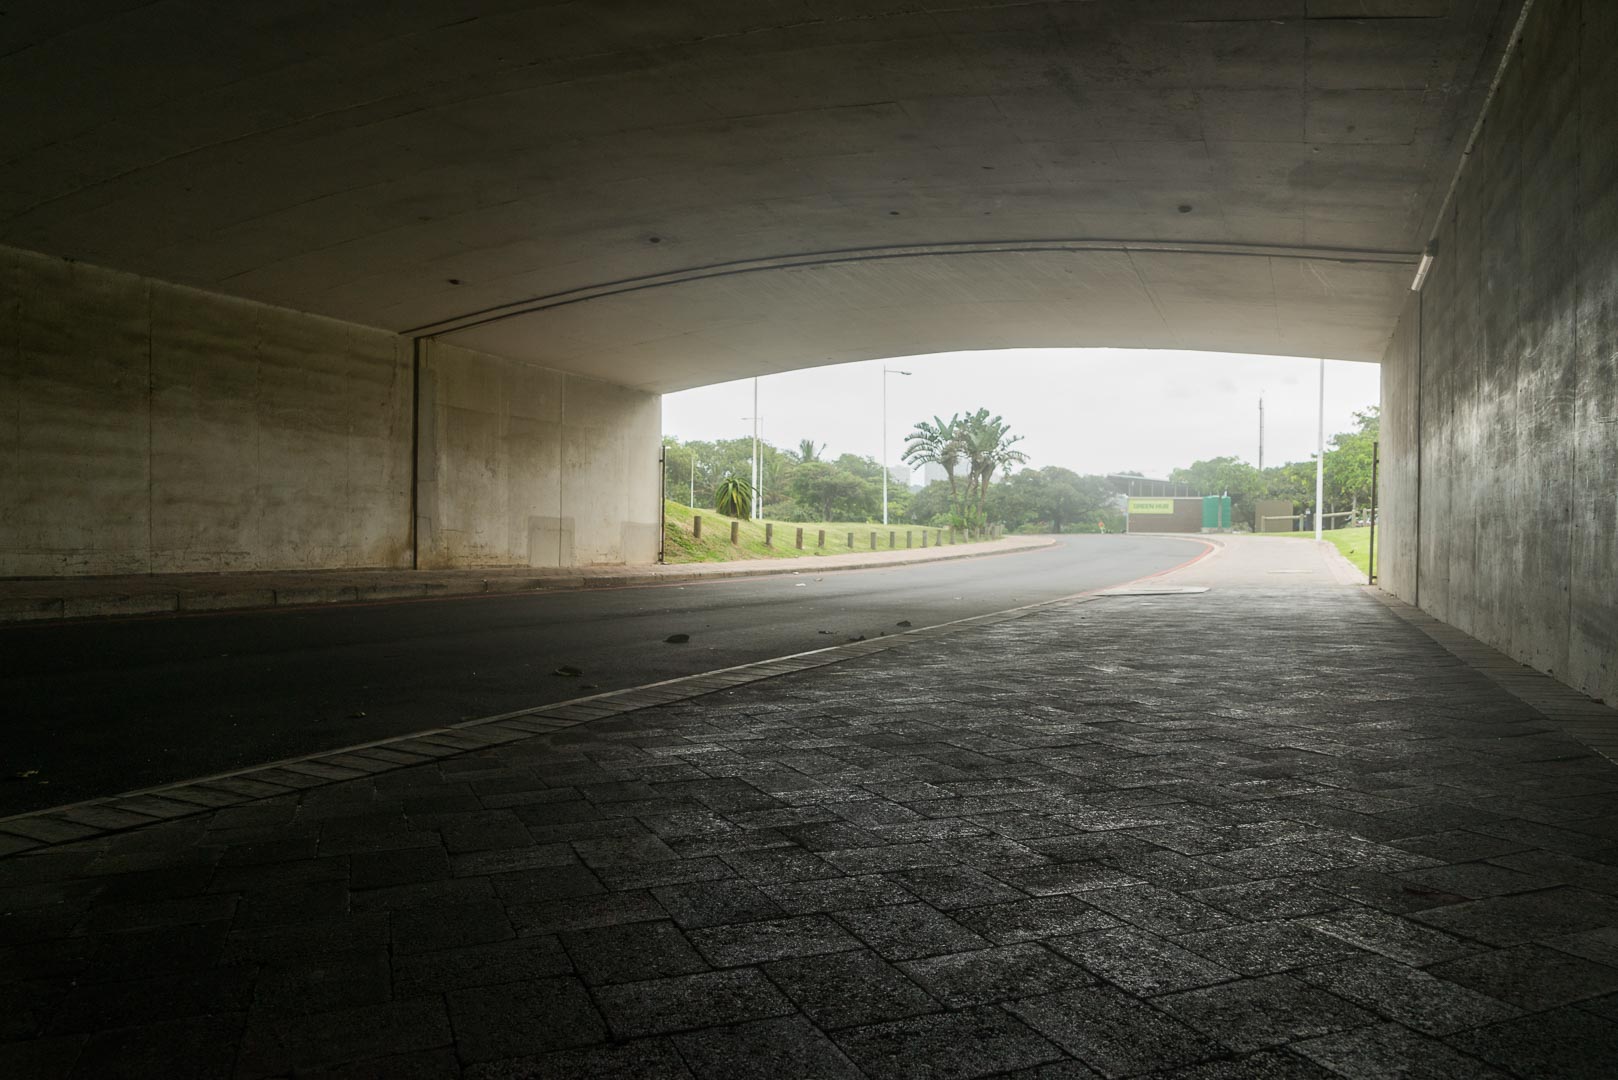 Backplate • ID: 14063 • HDRI Haven - Road Underpass